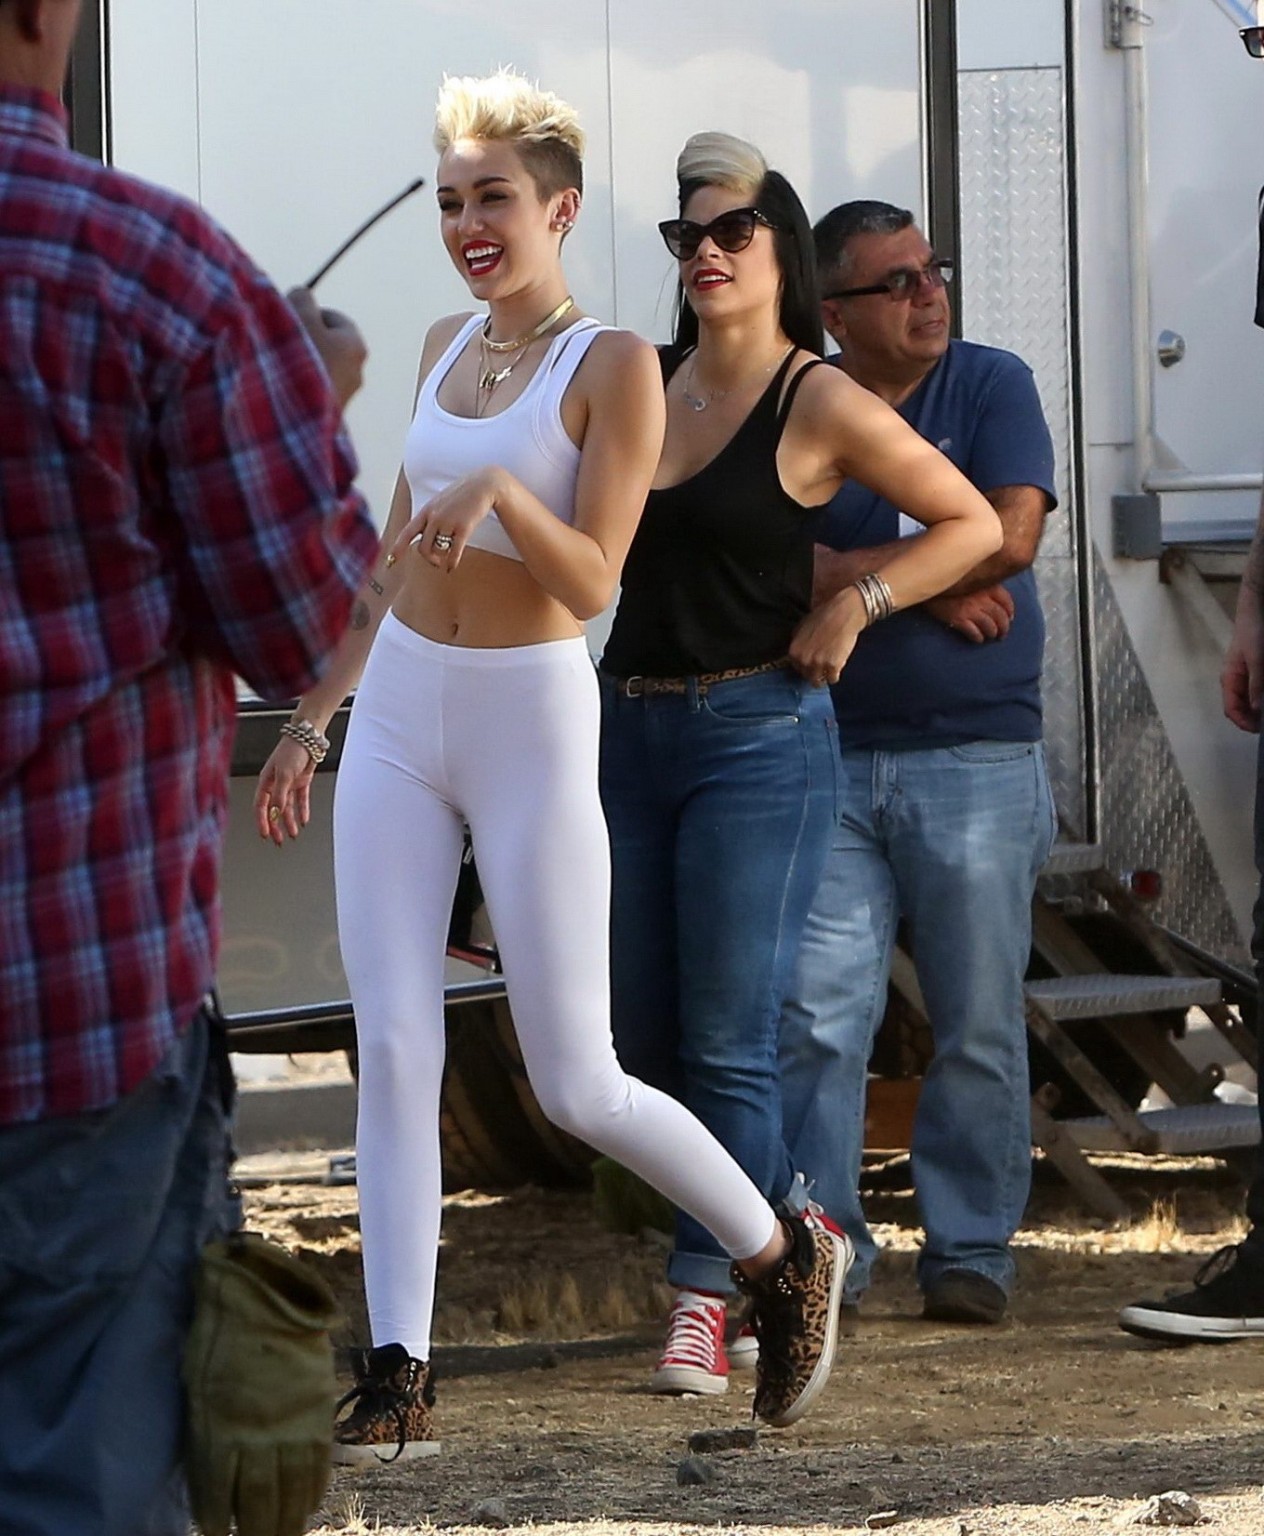 Miley Cyrus wearing the white tights  a sports bra on a music video set in LA #75230721